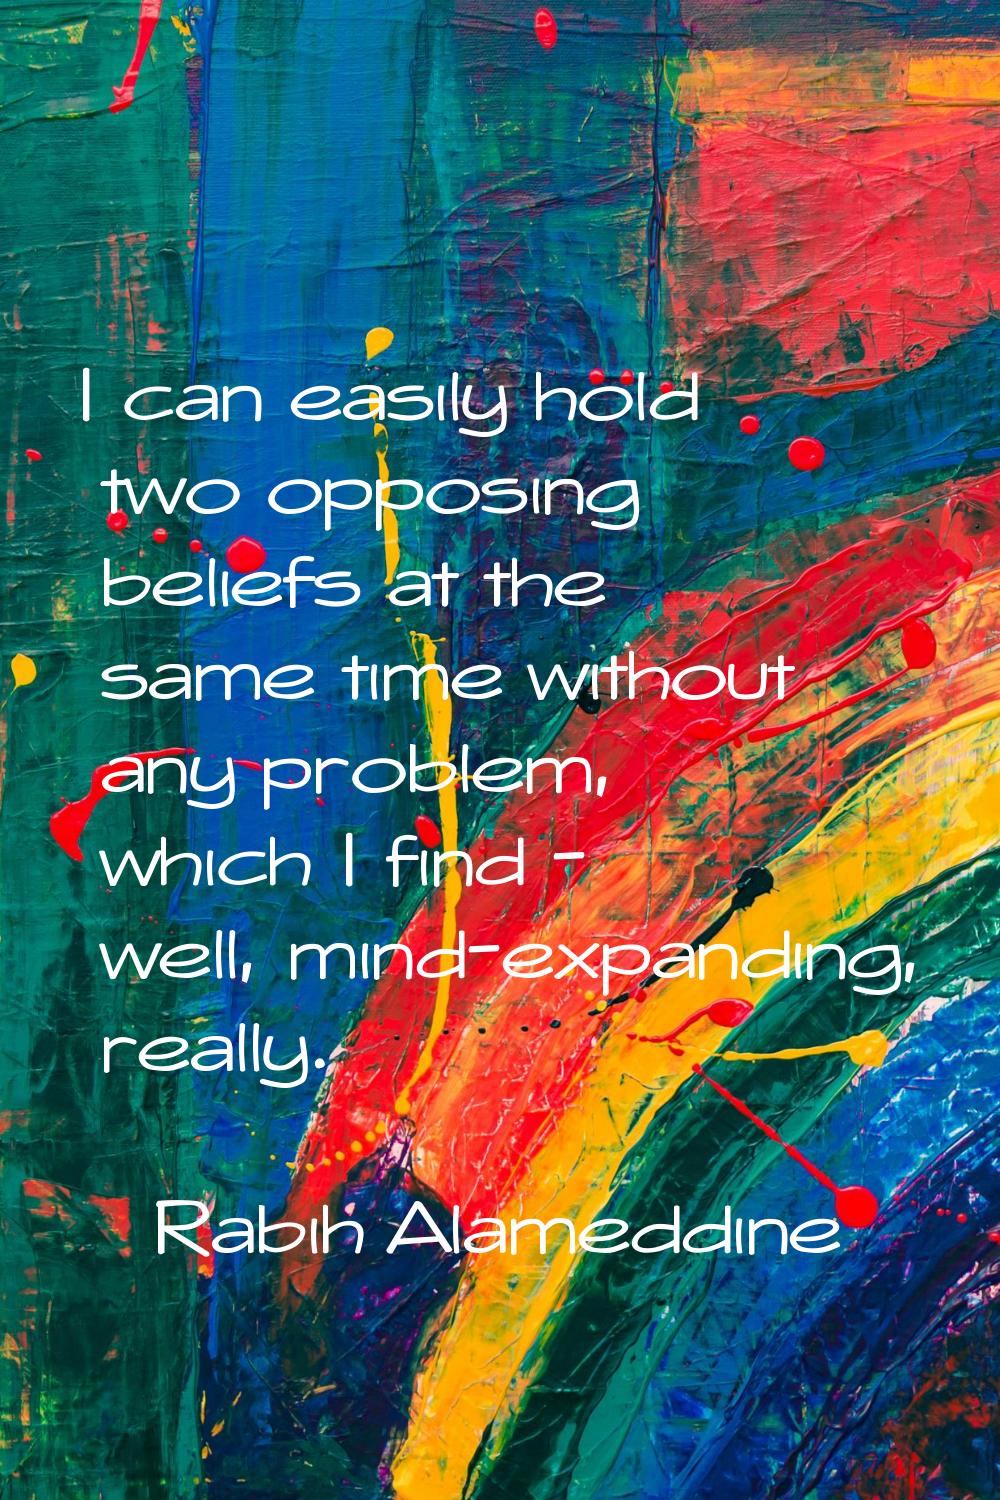 I can easily hold two opposing beliefs at the same time without any problem, which I find - well, m